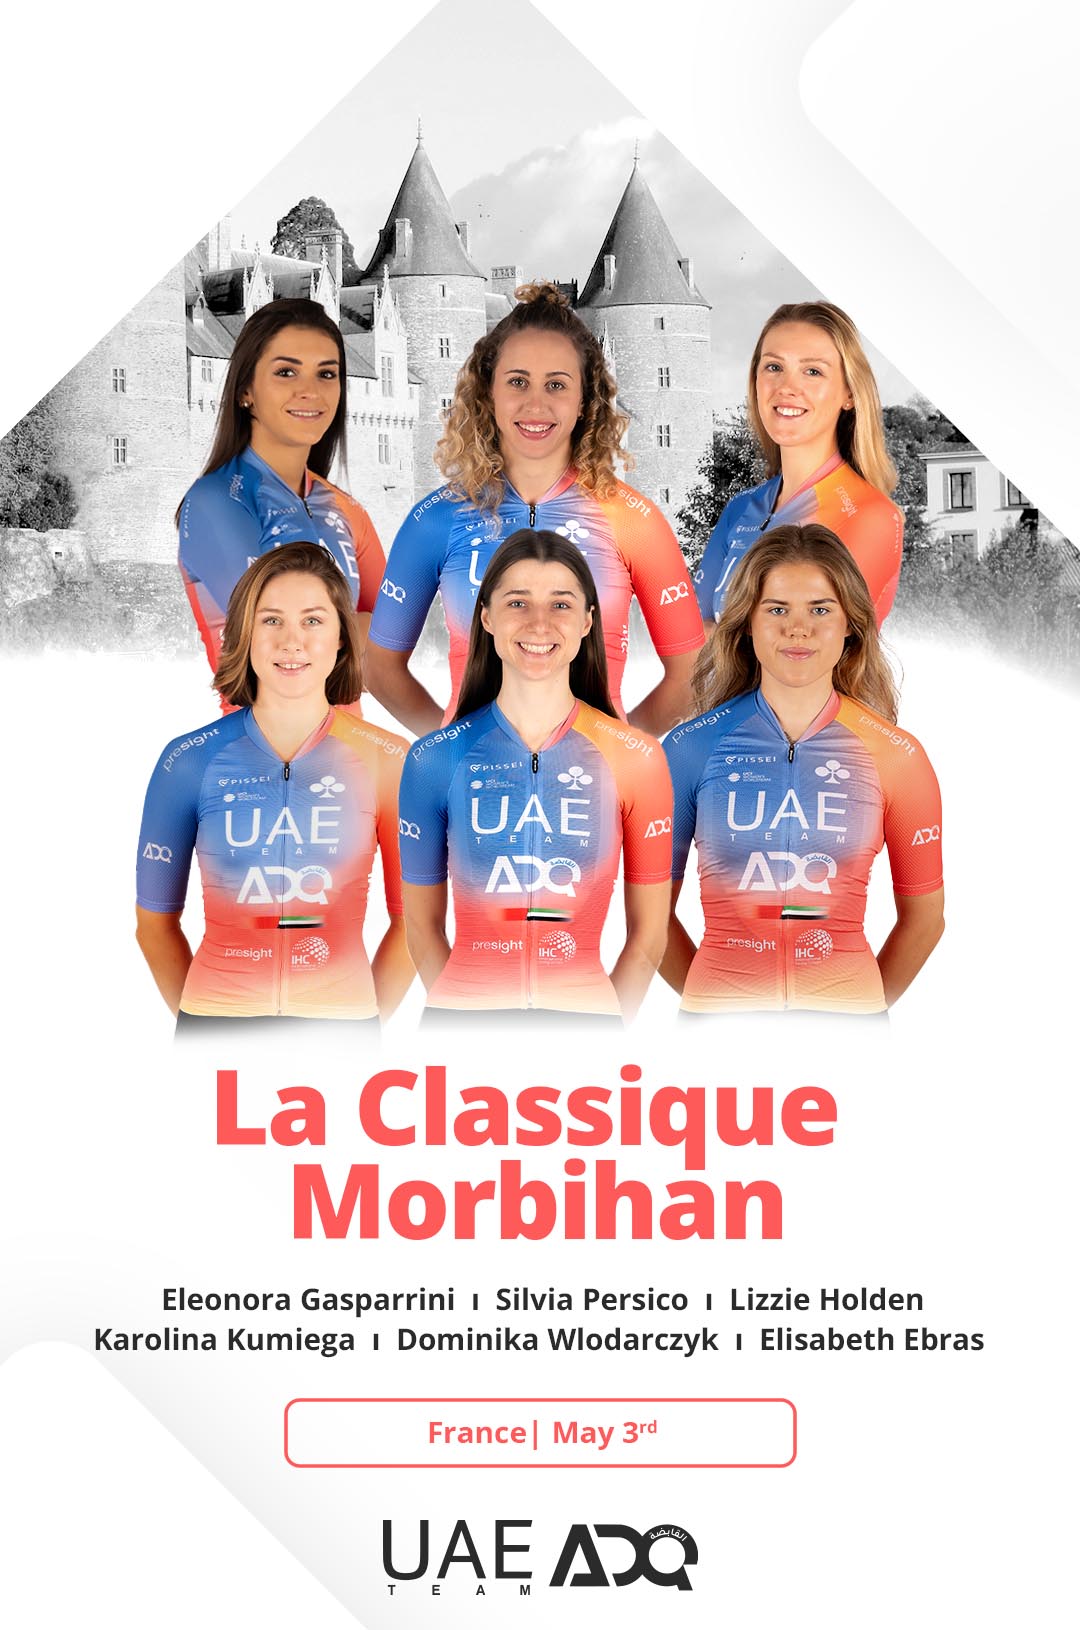 UAE Team ADQ for the two races in Morbihan